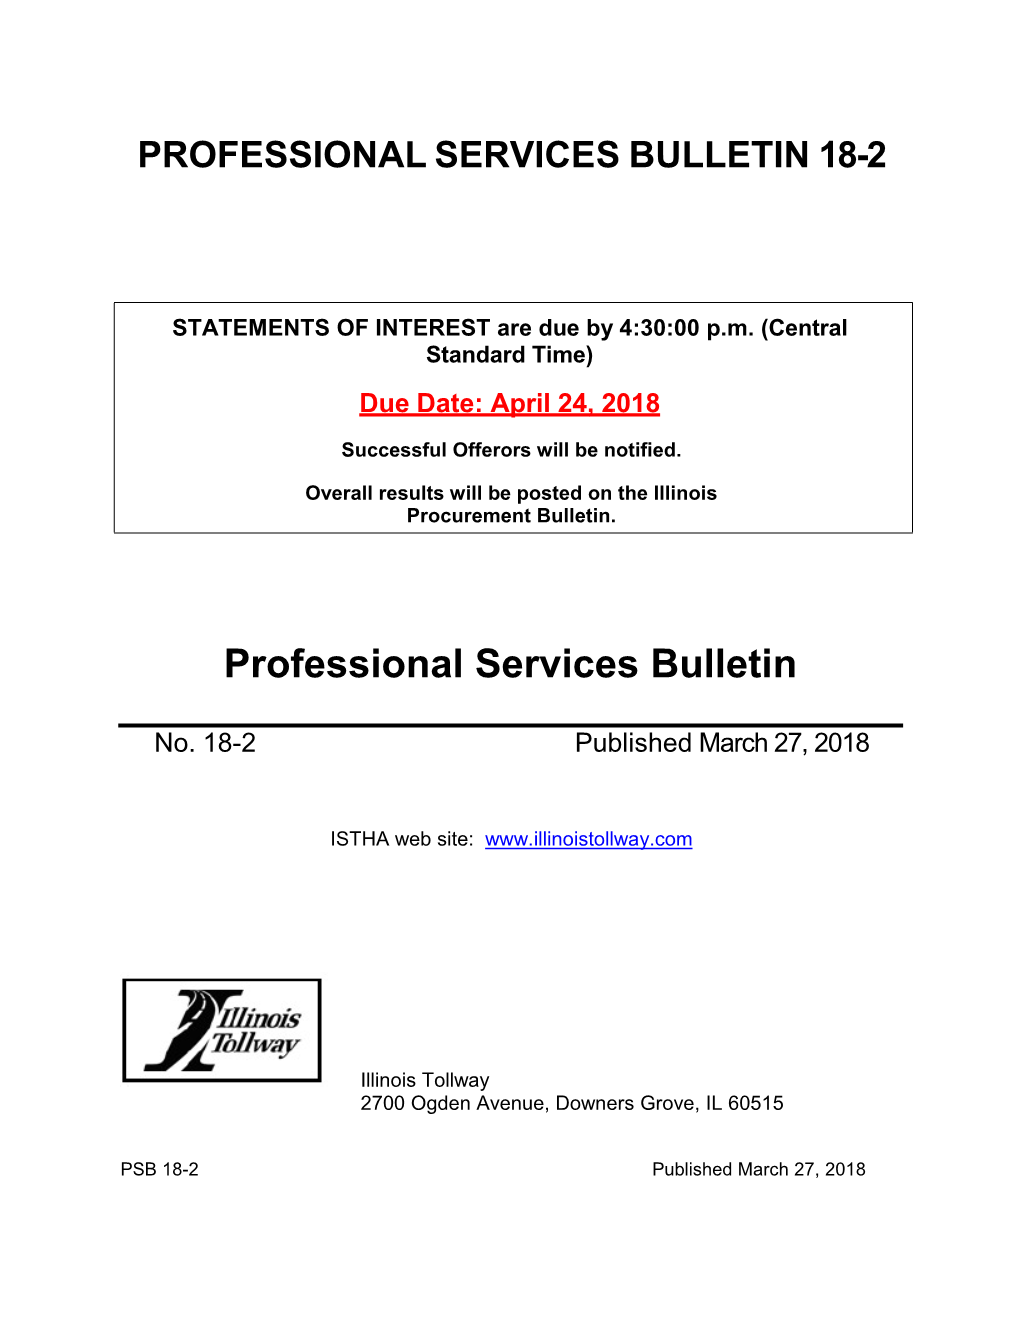 Professional Services Bulletin 18-2